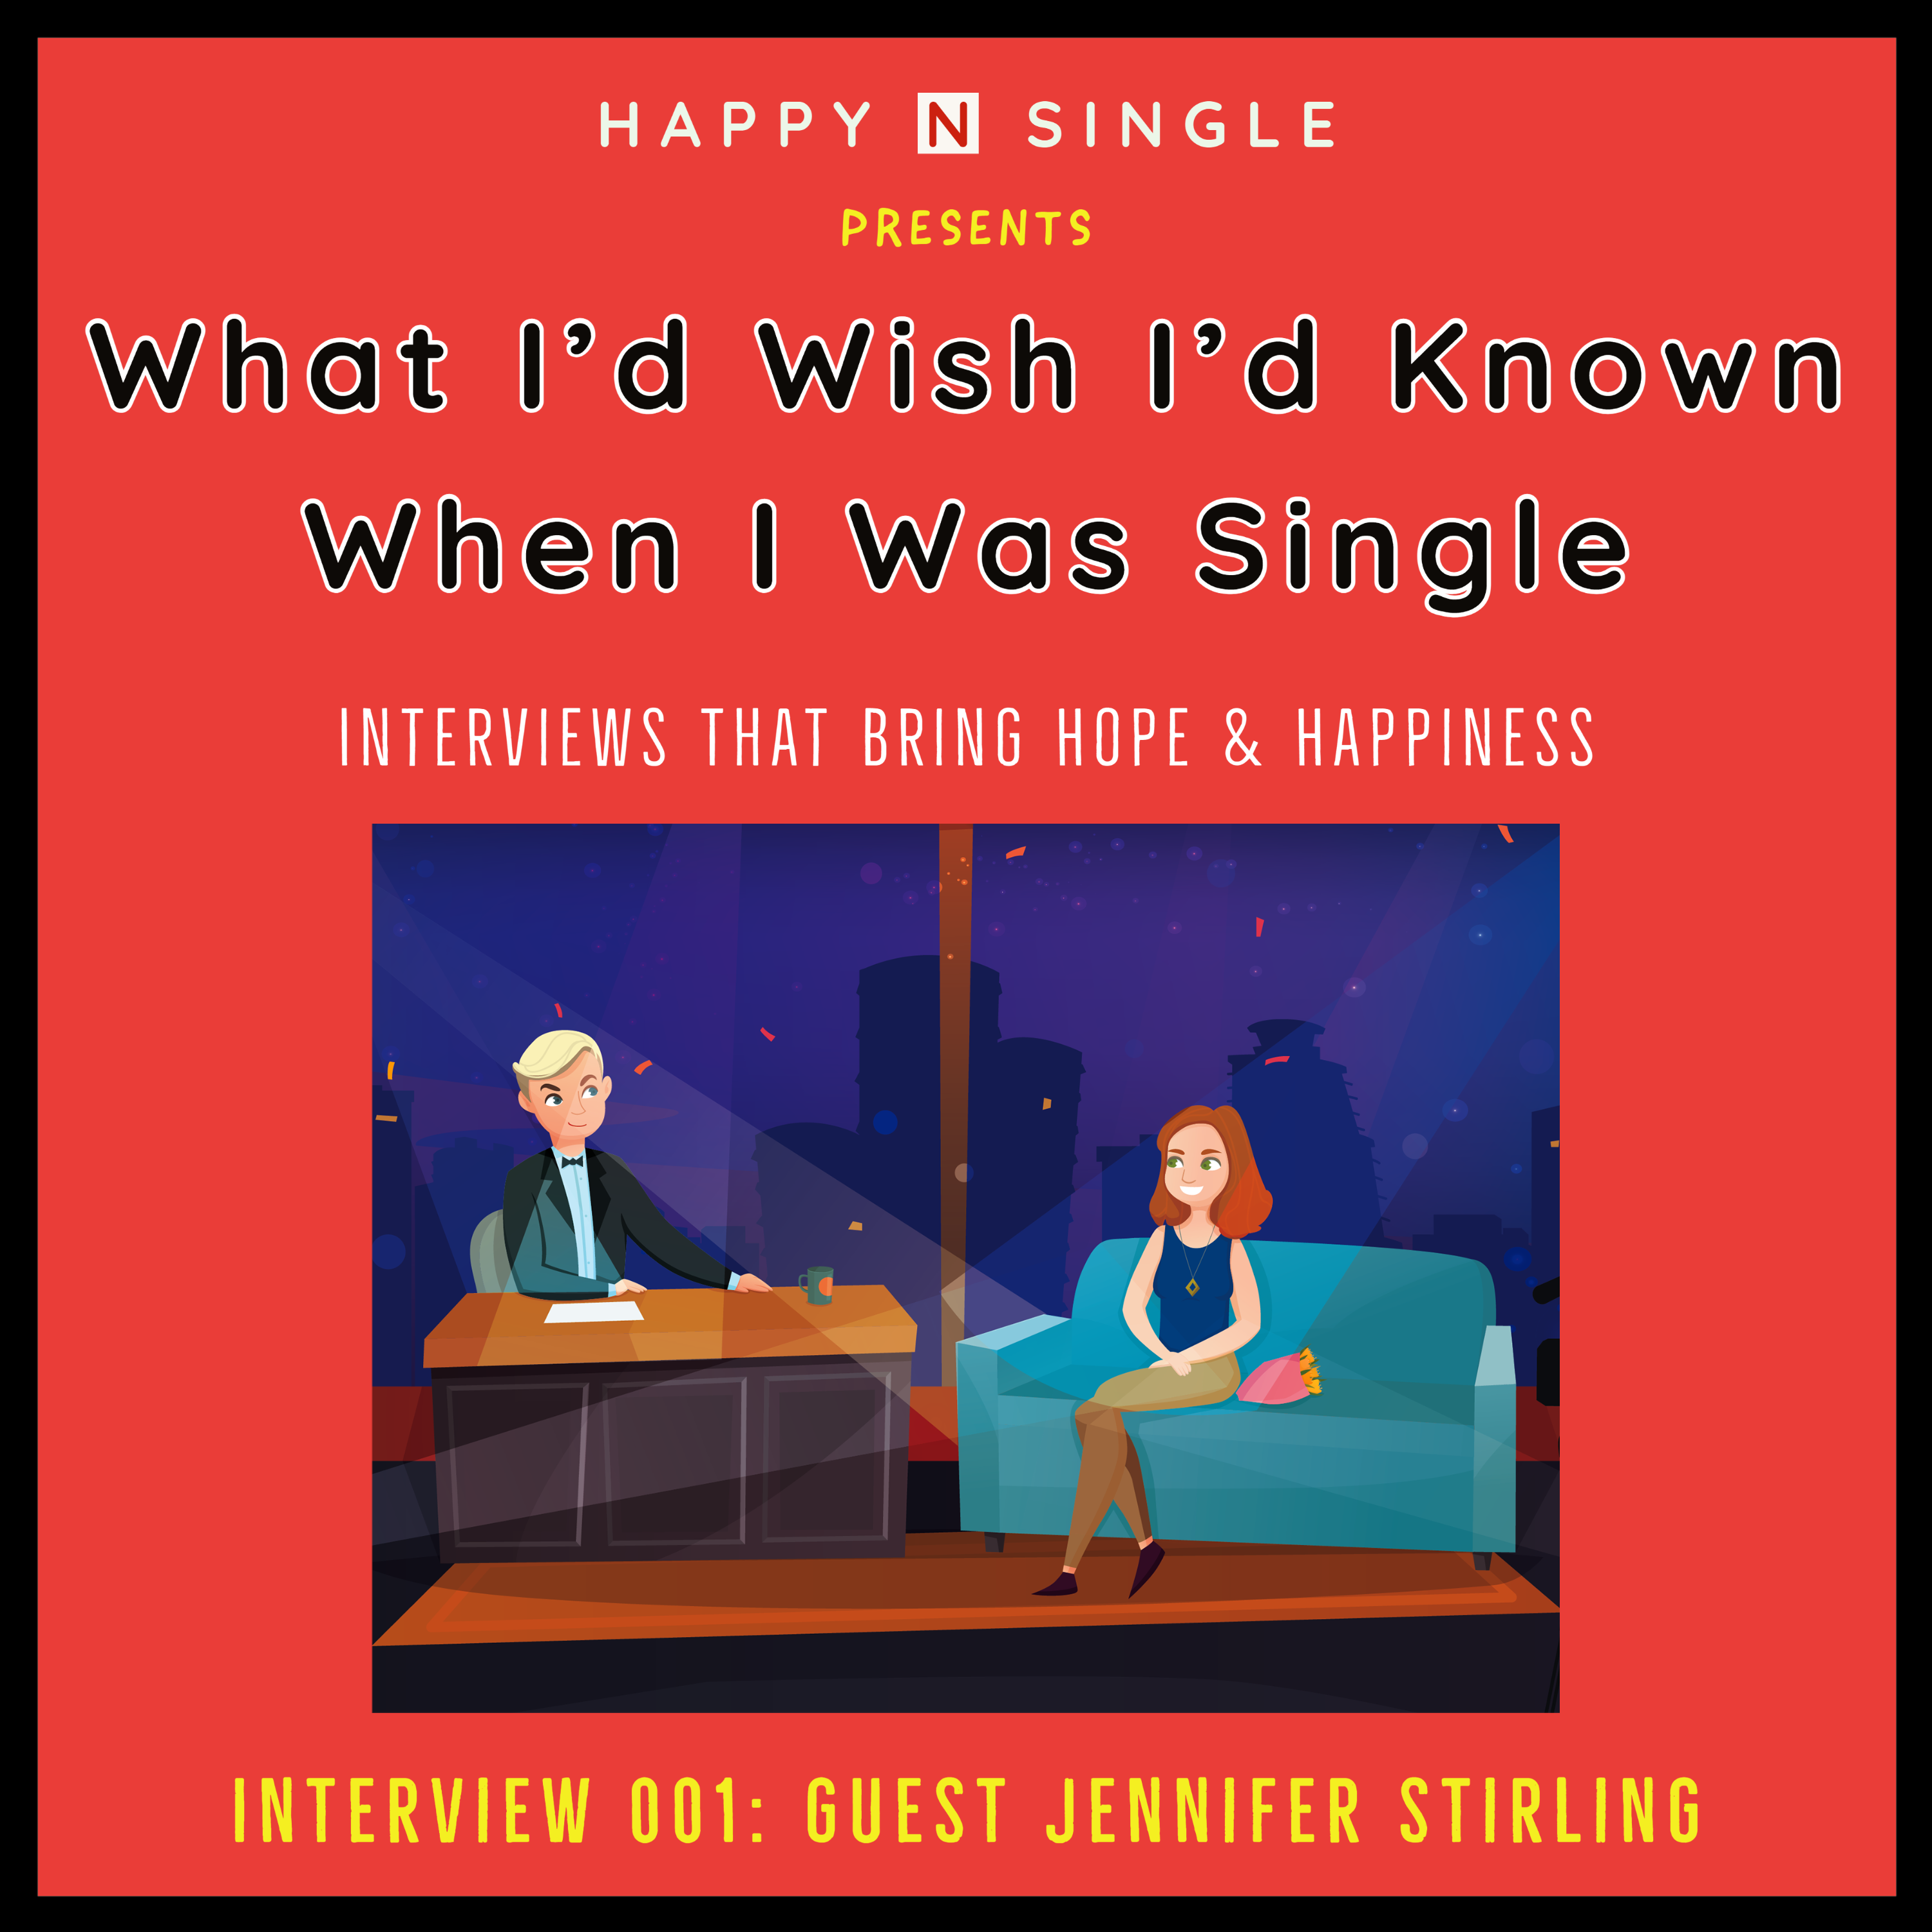 Interview with Jennifer Stirling